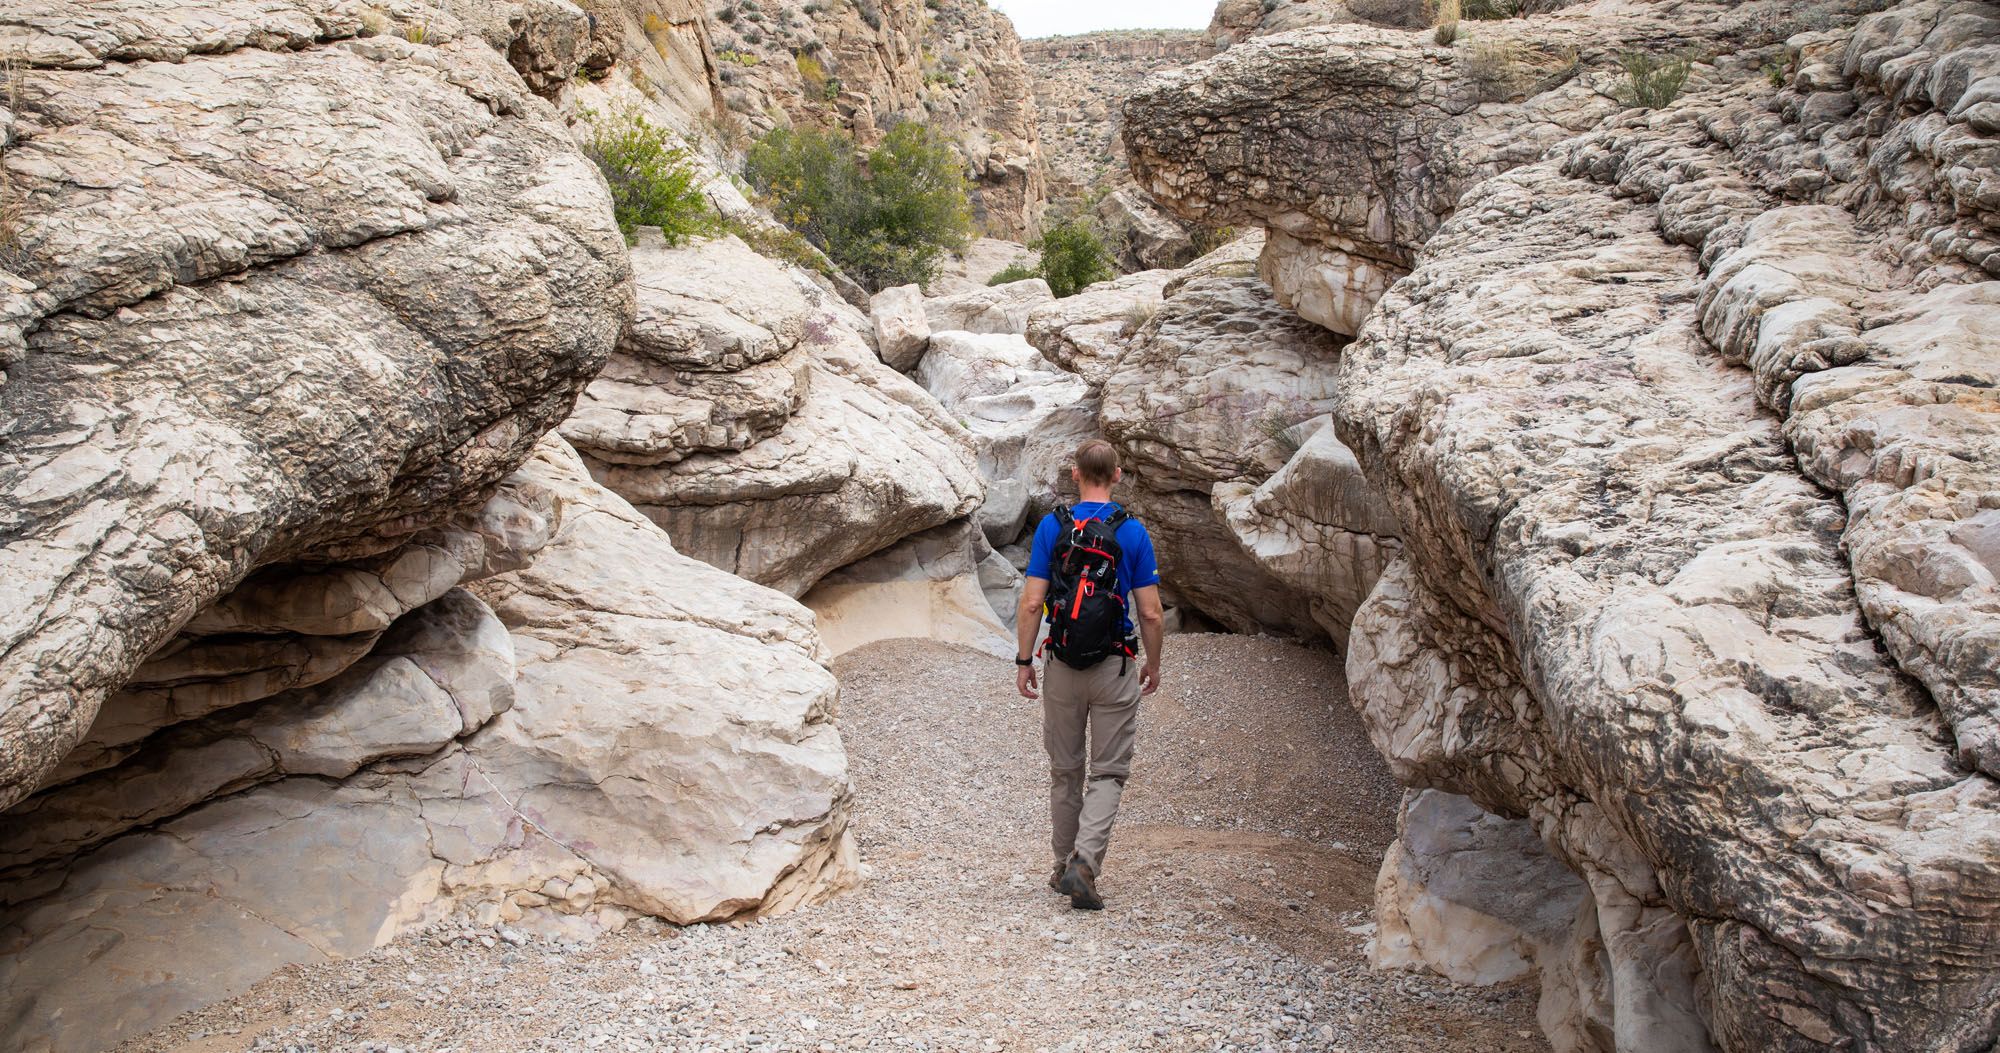 Featured image for “15 Great Hikes to Do in Big Bend National Park”